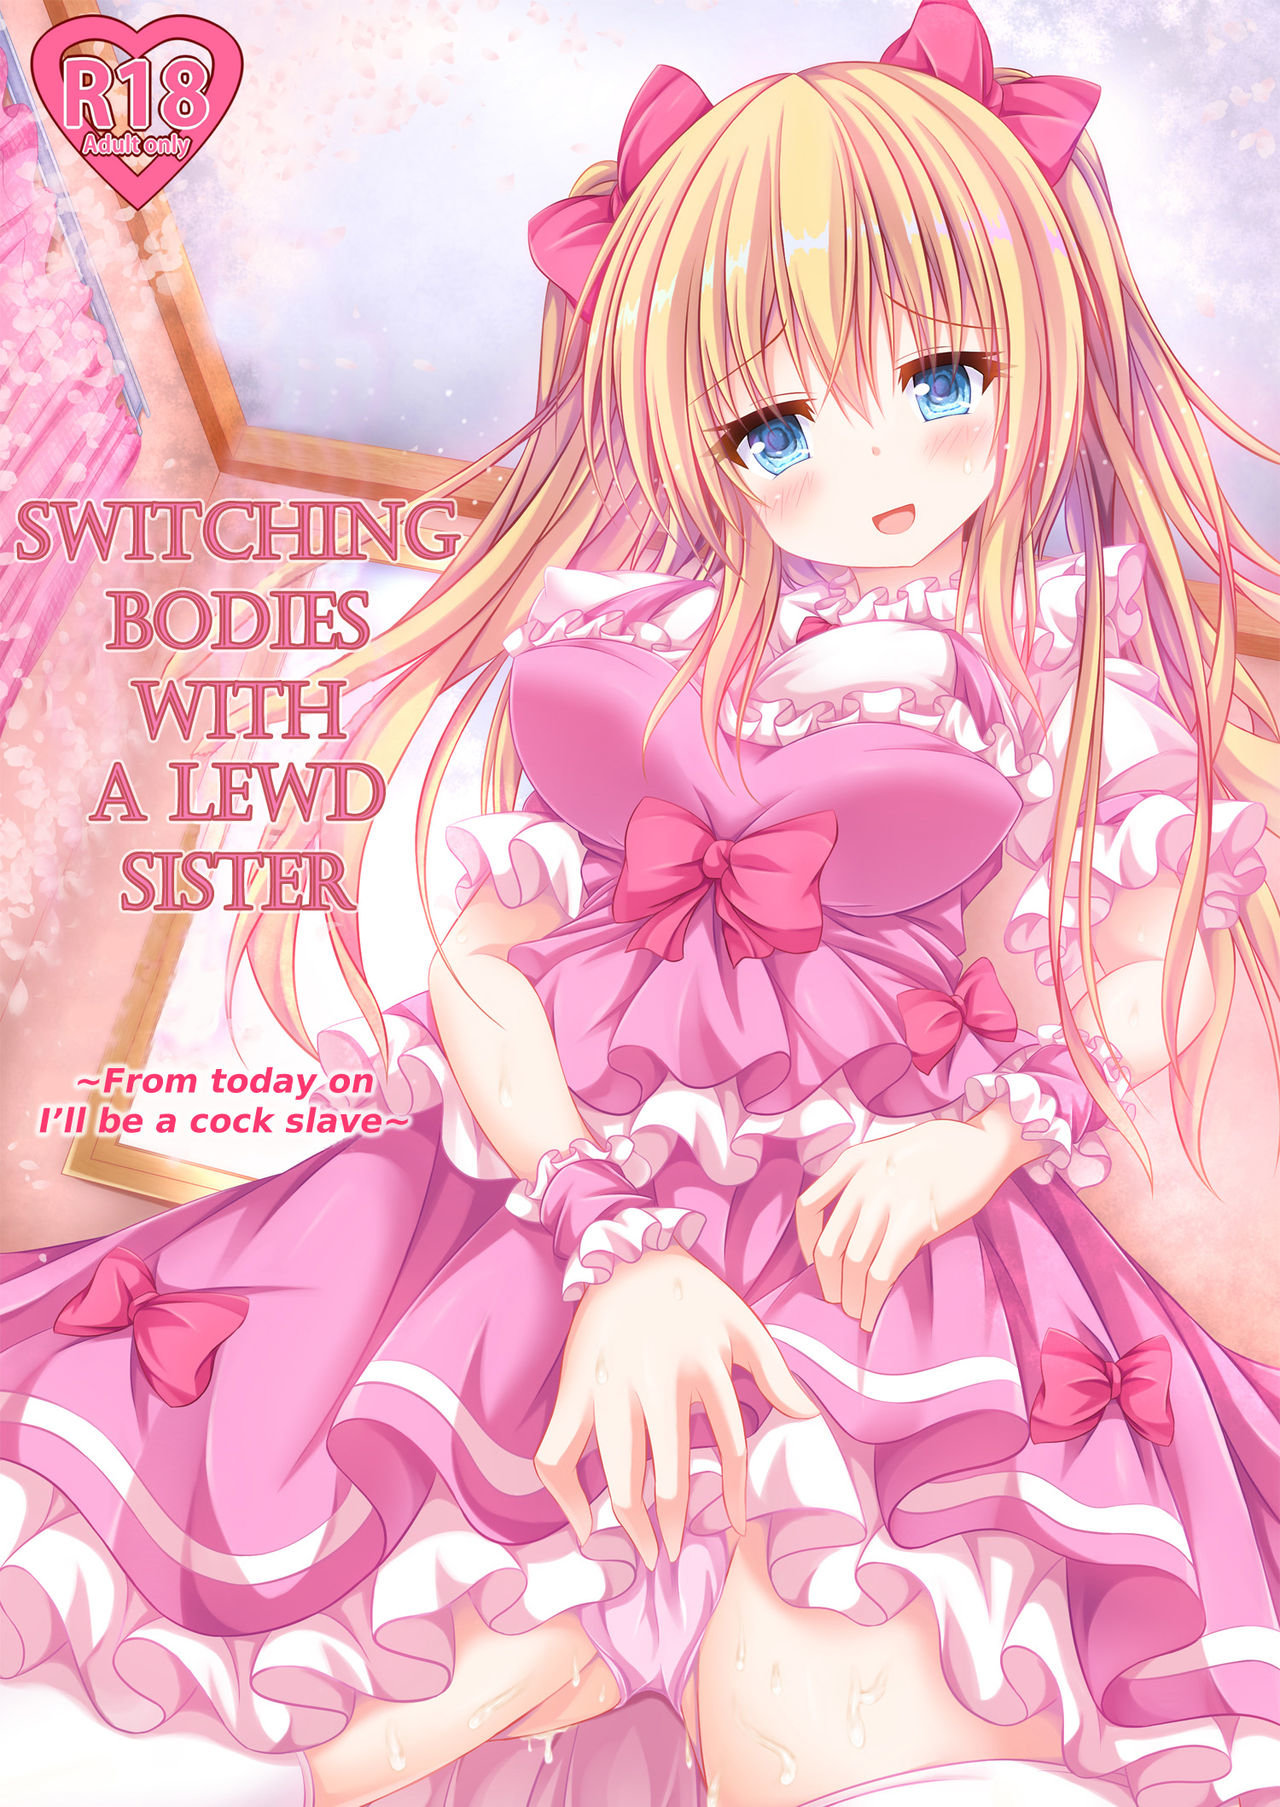 Switching Bodies With a Lewd Sister - 0